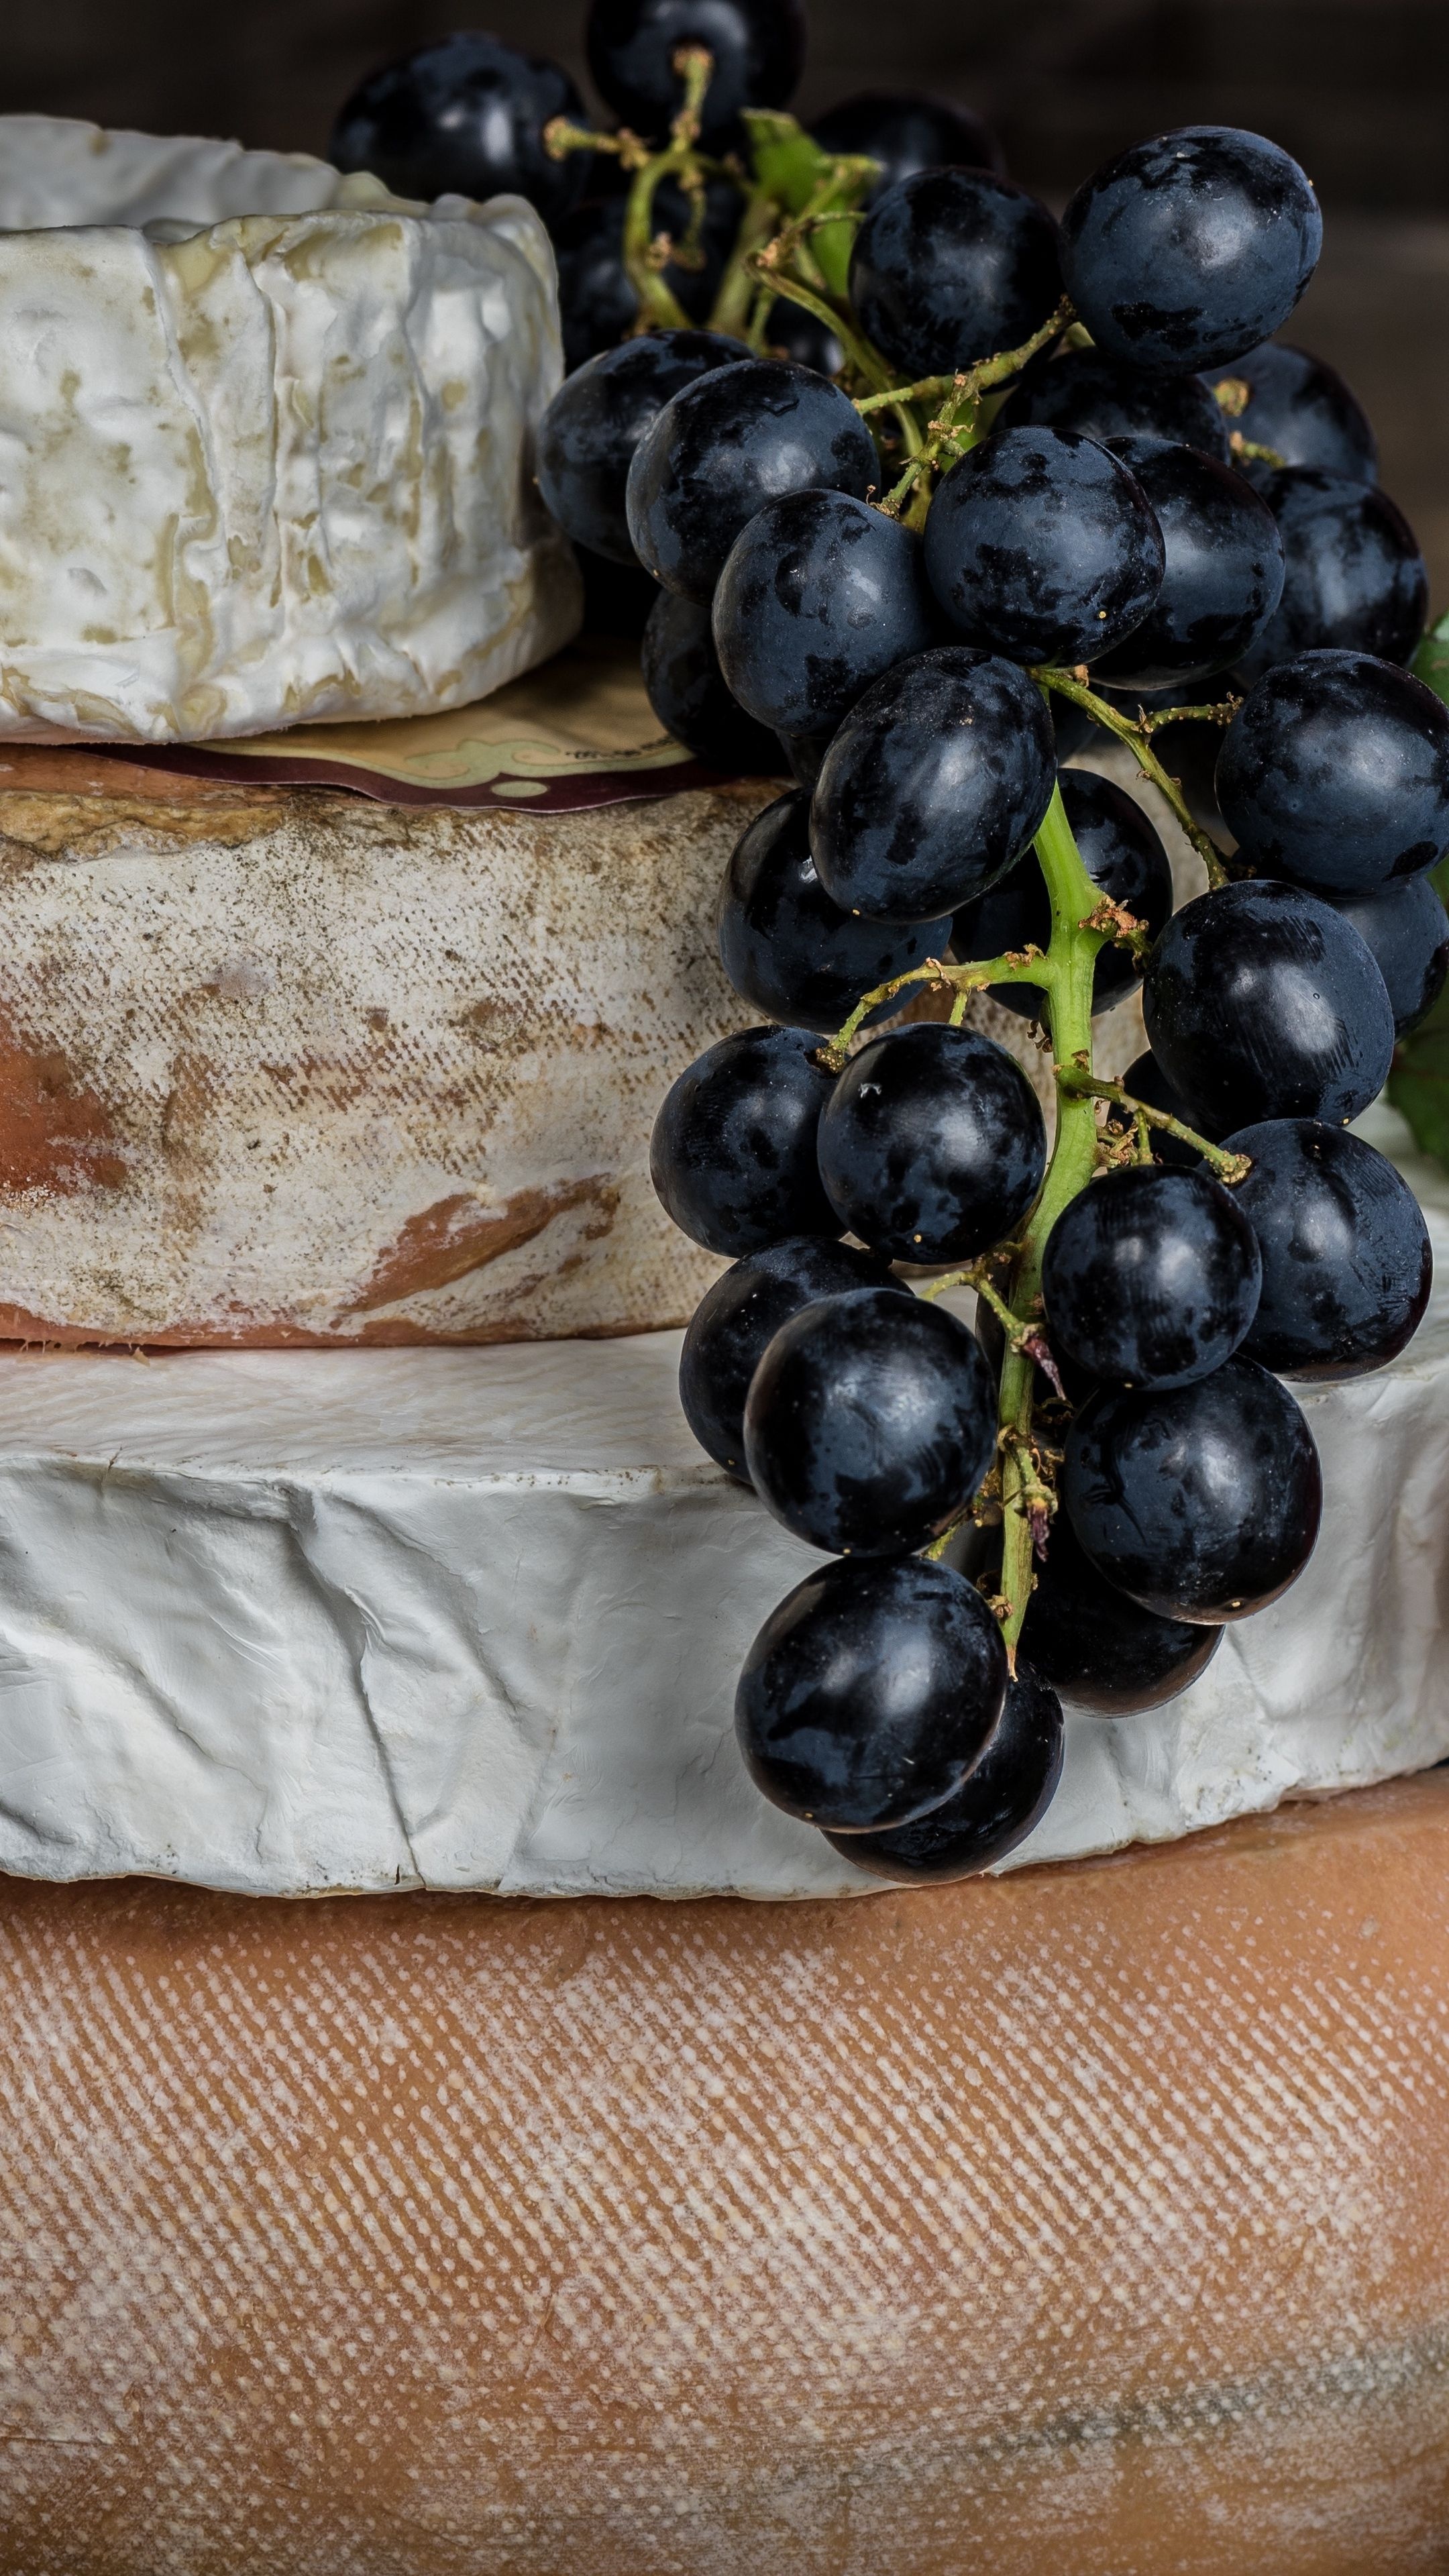 Cheese: Style, texture and flavor depend on the origin of the milk. 2160x3840 4K Background.